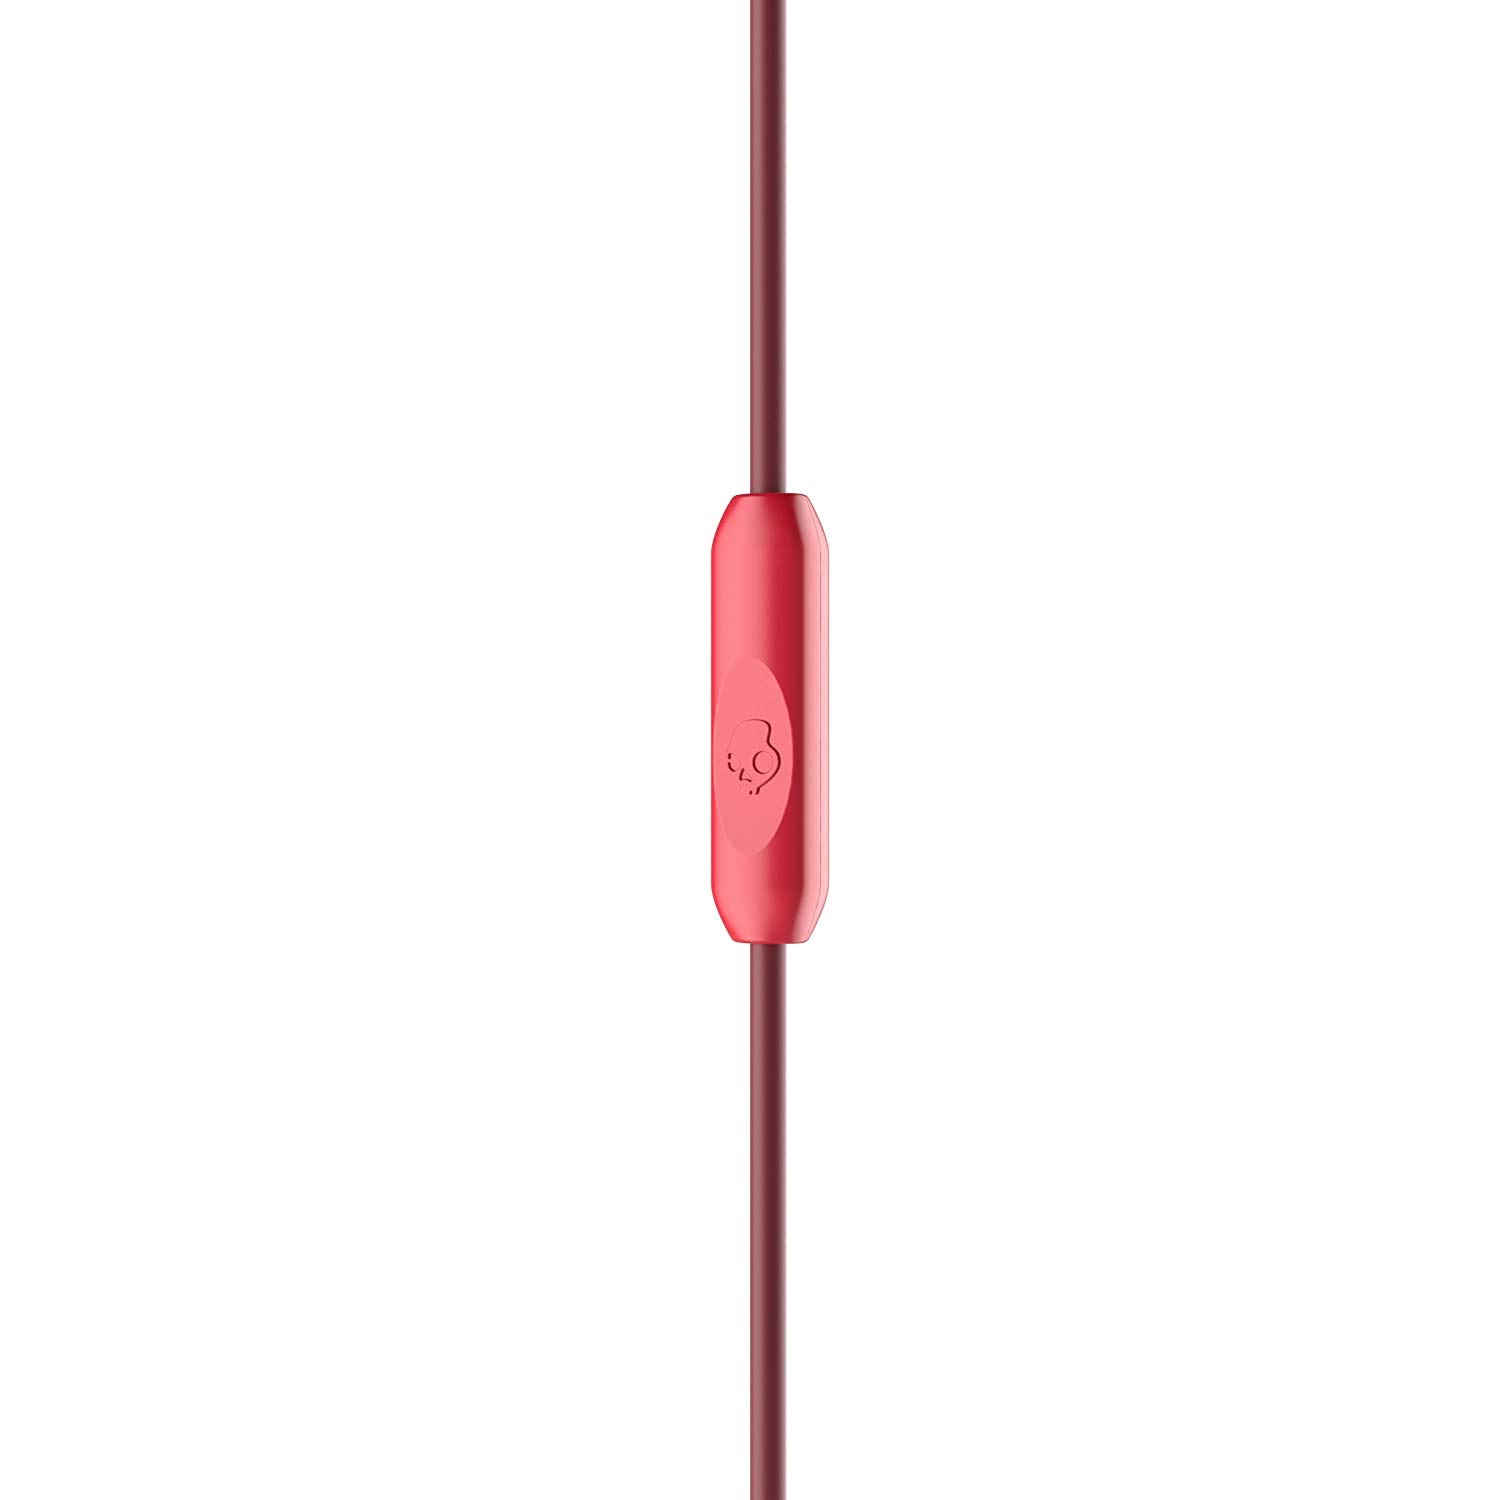 Skullcandy Stim Wired On-Ear Headphone with Mic-(Red)